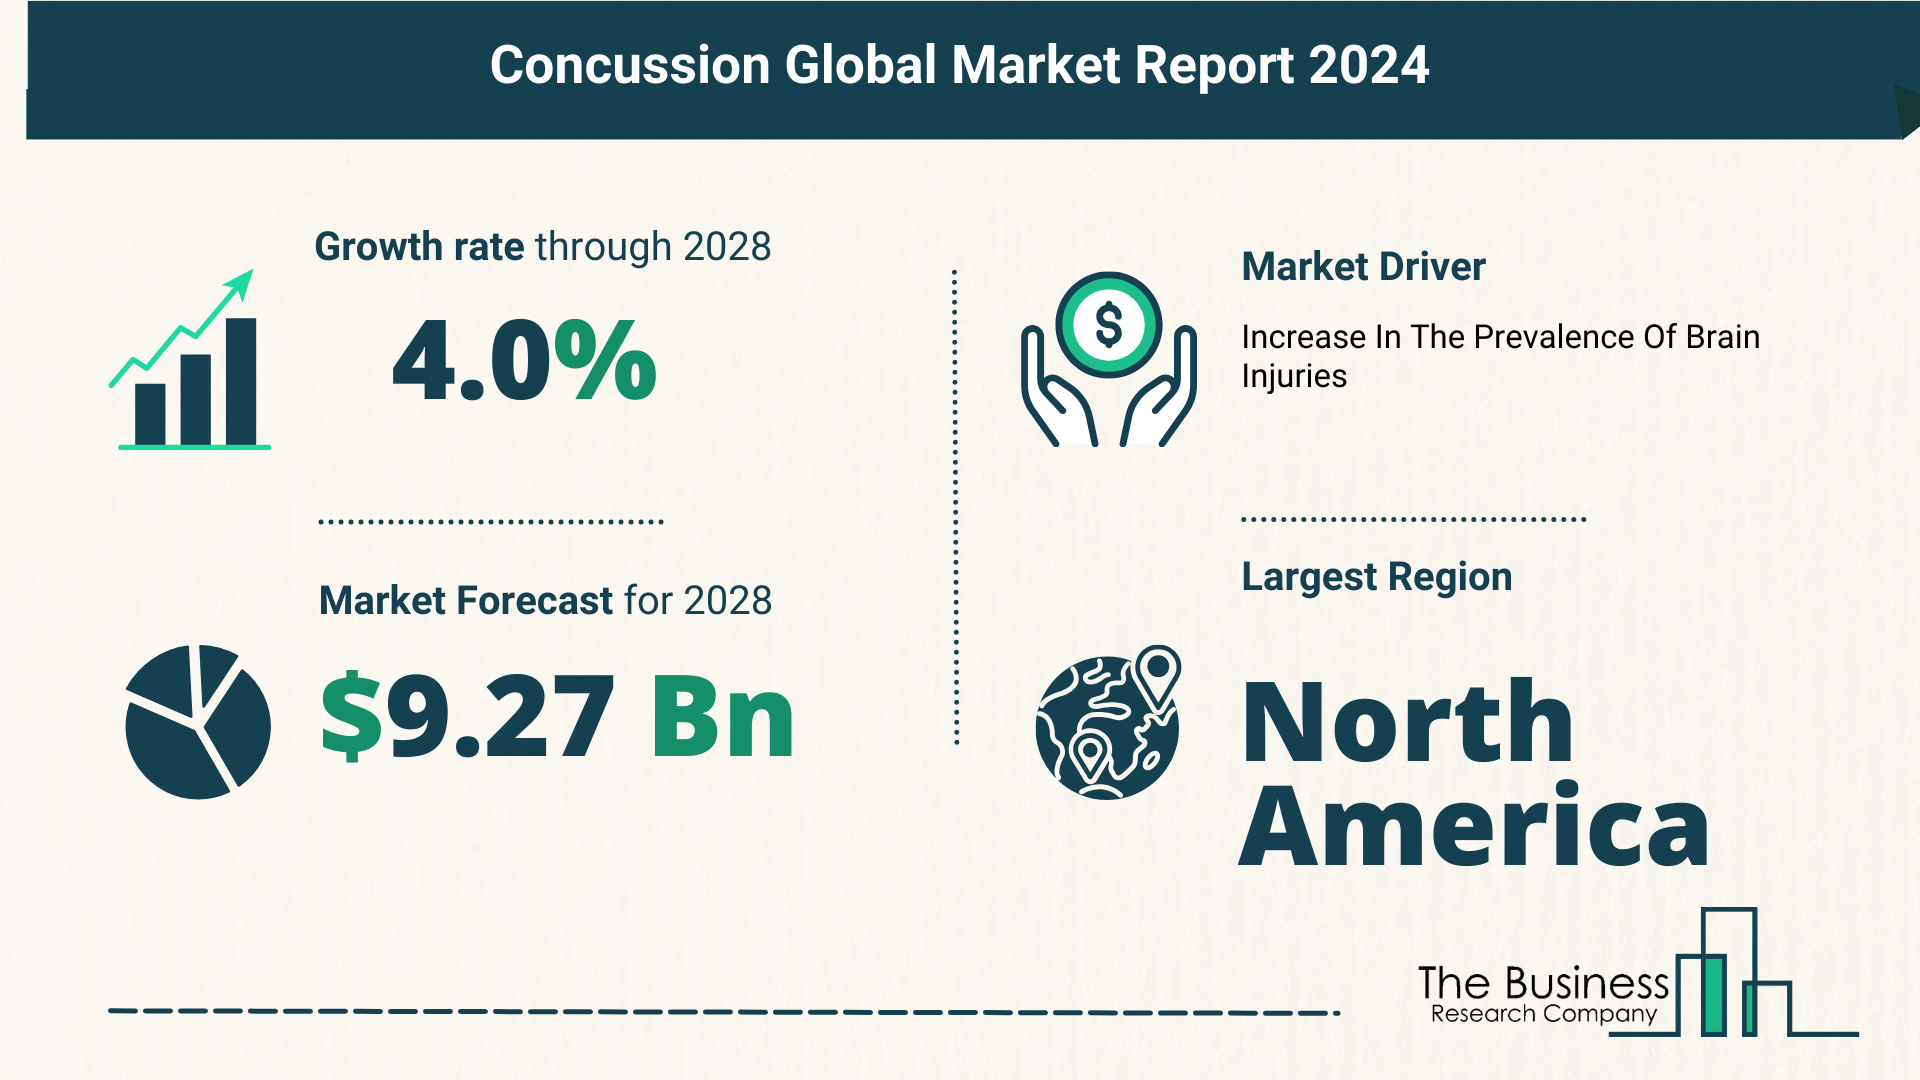 Key Trends And Drivers In The Concussion Market 2024